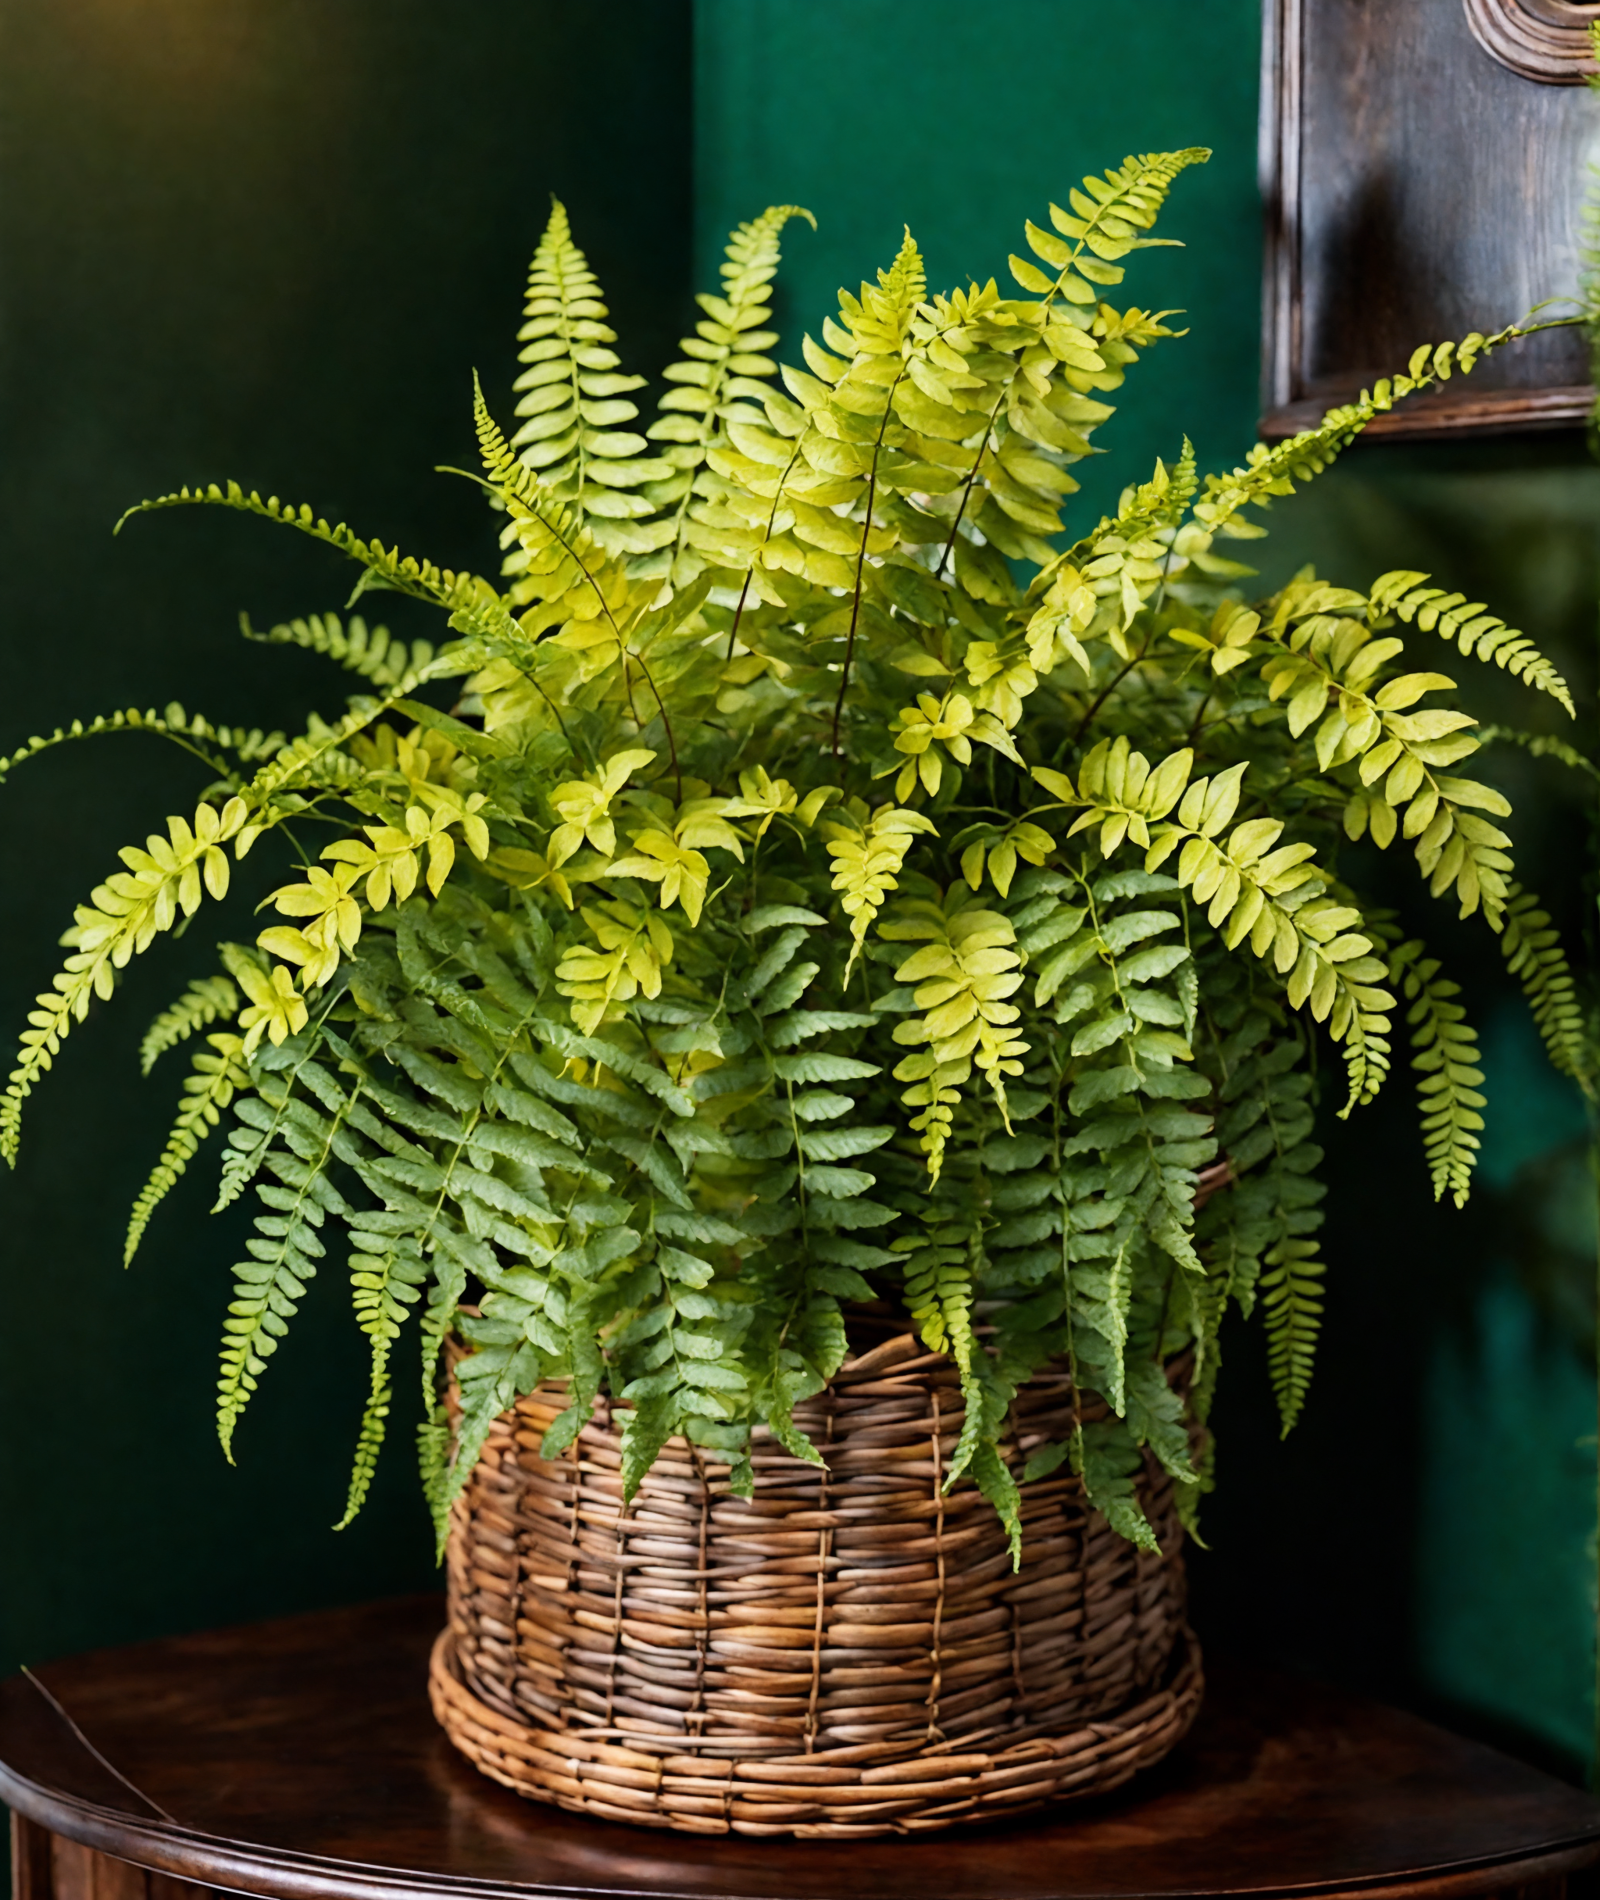 Lush Boston fern (Nephrolepis exaltata) in a rustic wood planter on a wooden table, well-lit room.